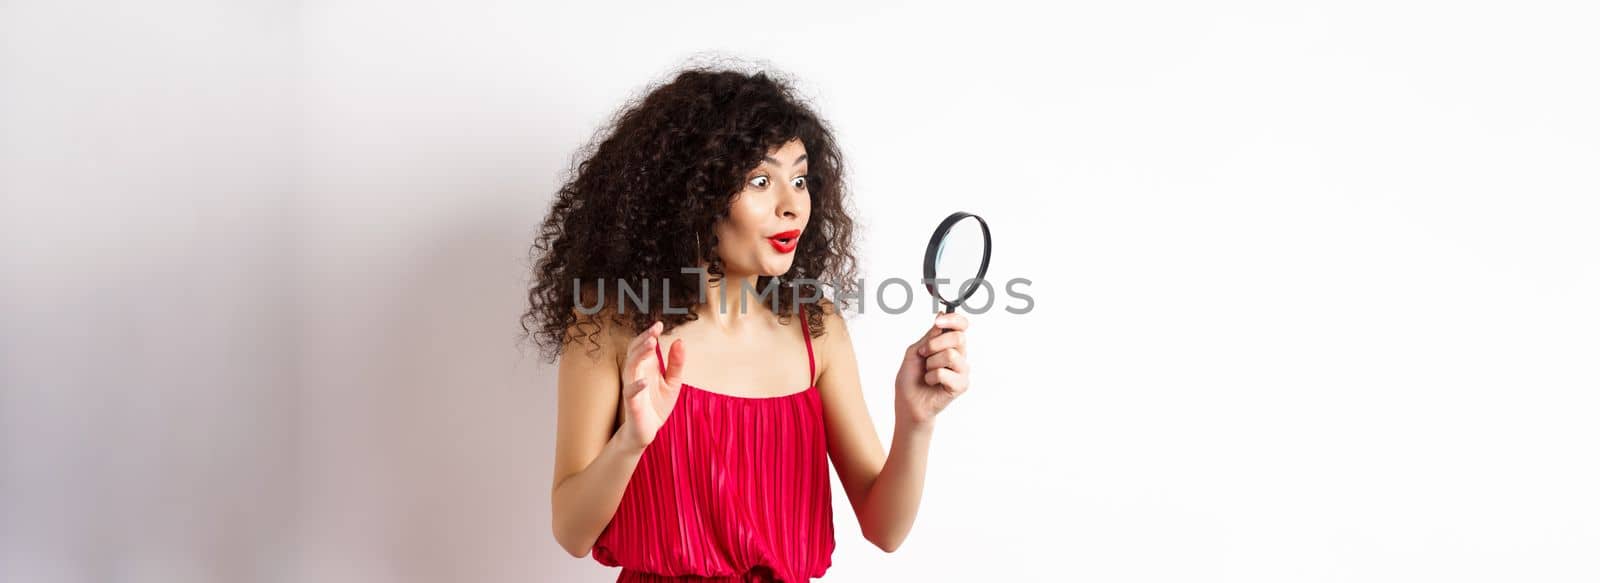 Excited woman in red dress look through magnifying glass and smiling, found interesting promo, standing on white background.